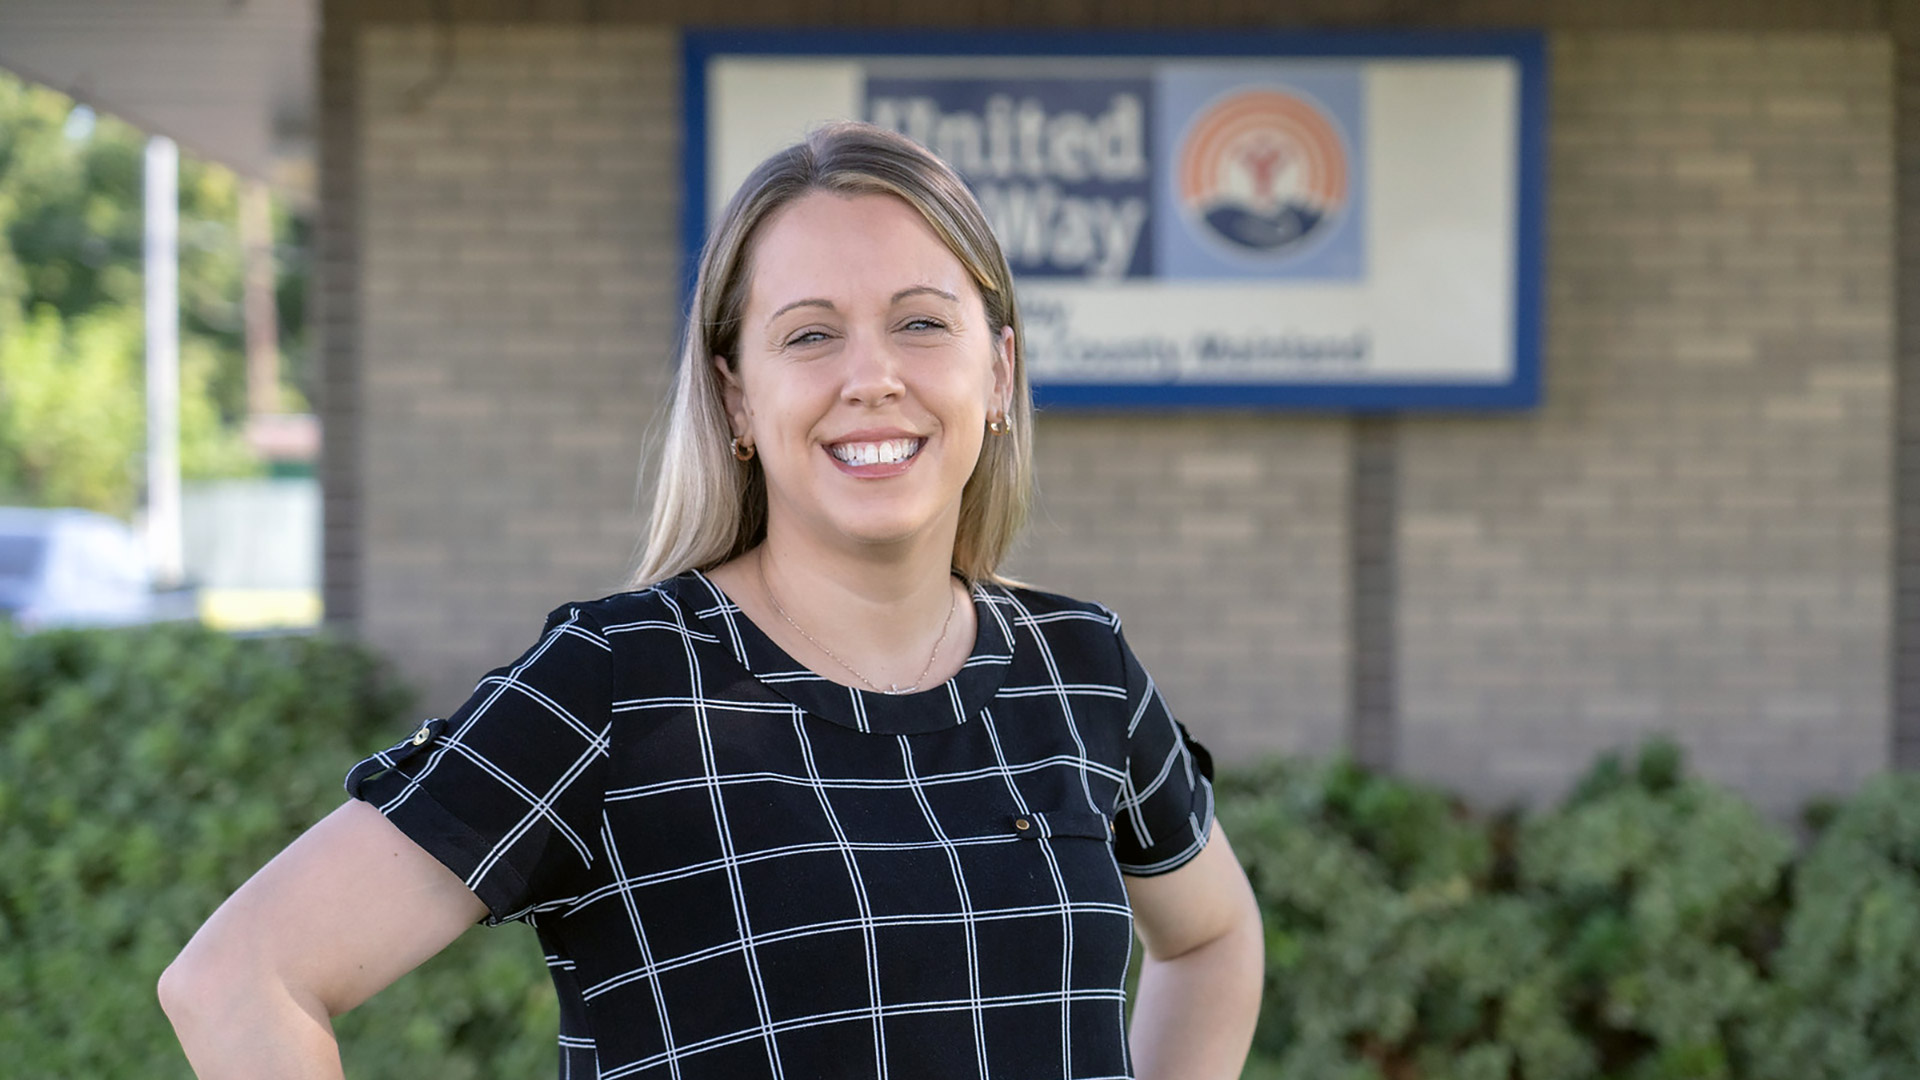 Alum named executive director of United Way Galveston County Mainland: 'It's not just a job'